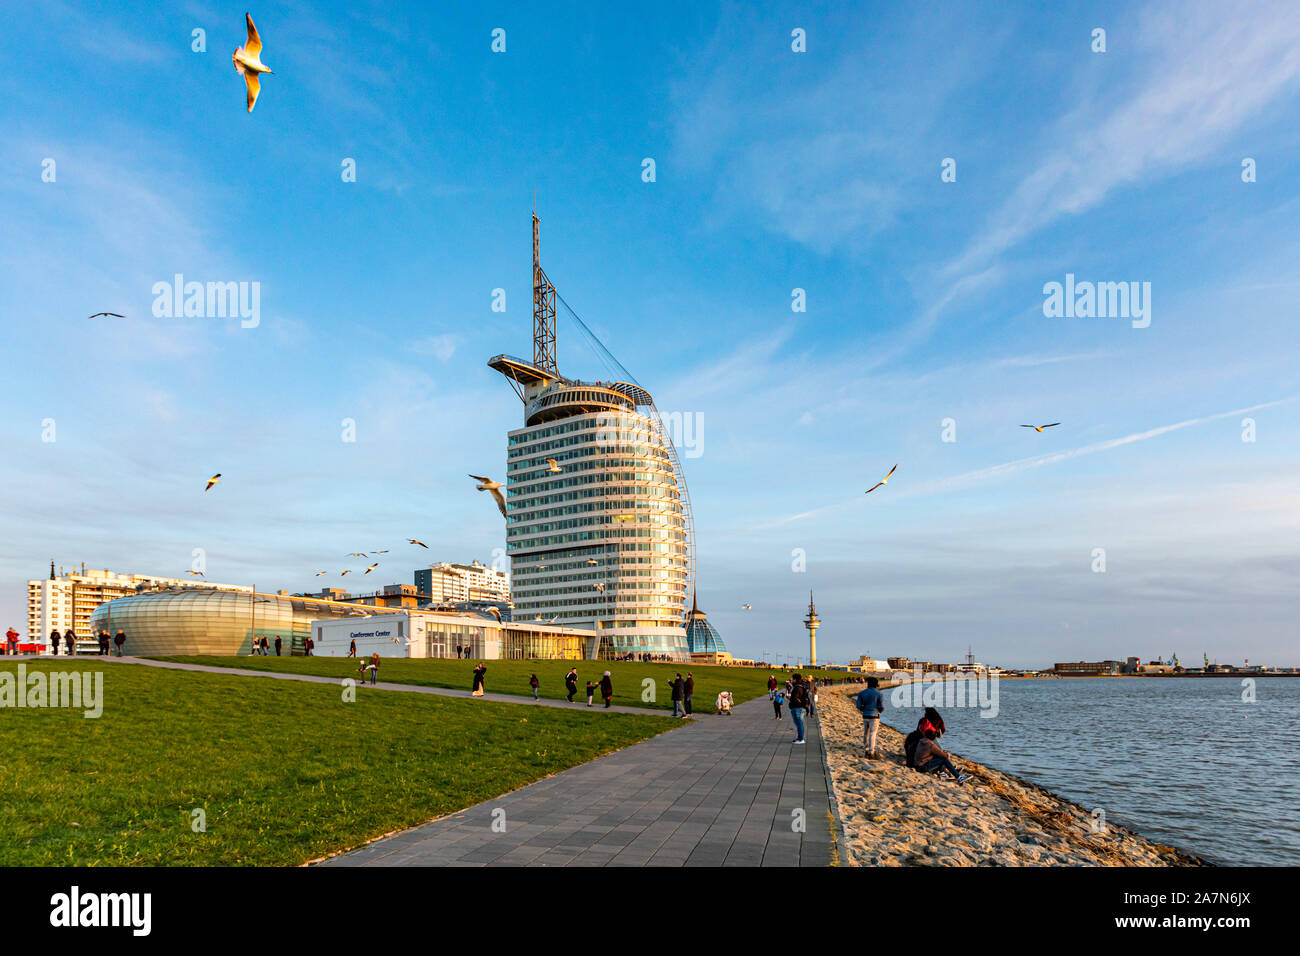 Bremerhaven, Germany - 2 Nov 2019: People playing with seagulls on Weser river Promenade am Strom riverfront embarkment in sunset. Sail-shaped Atlanti Stock Photo